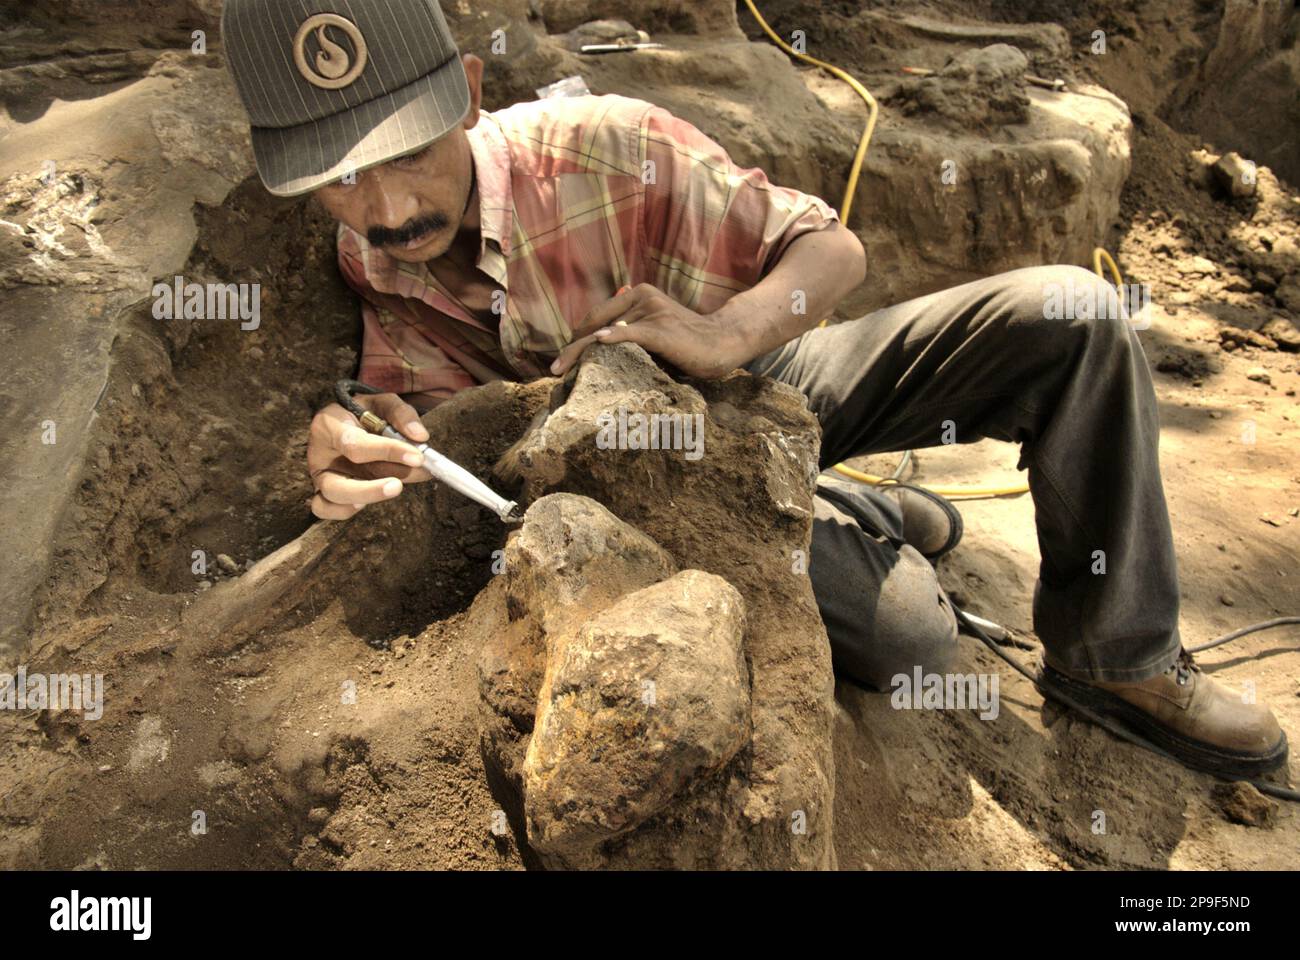 Paleontologist Iwan Kurniawan is working on the excavation of fossilized bones of an extinct elephant species scientifically identified as Elephas hysudrindicus, or popularly called "Blora elephant", in Sunggun, Mendalem, Kradenan, Blora, Central Java, Indonesia. The team of scientists from Vertebrate Research (Geological Agency, Indonesian Ministry of Energy and Mineral Resources) led by Kurniawan himself with Fachroel Aziz discovered the species' bones almost entirely (around 90 percent complete) that later would allow them to build a scientific reconstruction, which is displayed at... Stock Photo